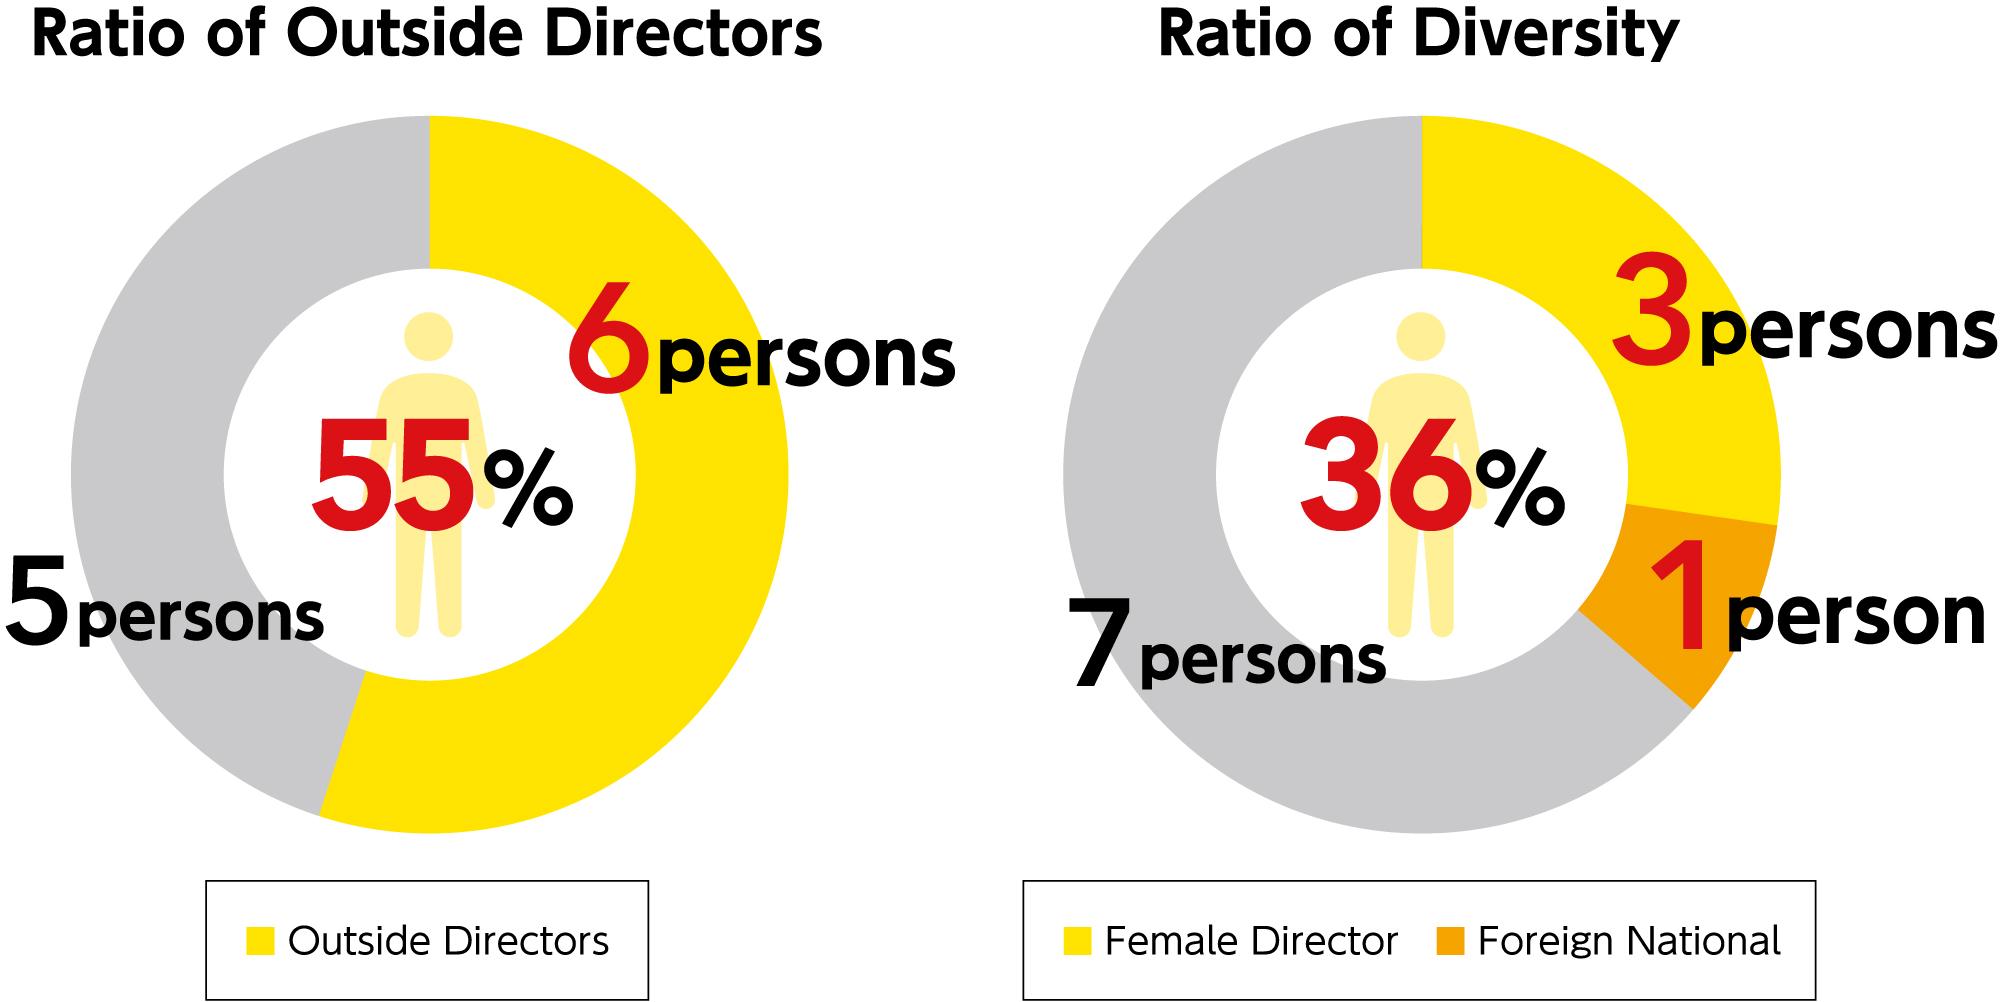 The ratio of Outside Directors and the diversity ratio of the Board of Directors